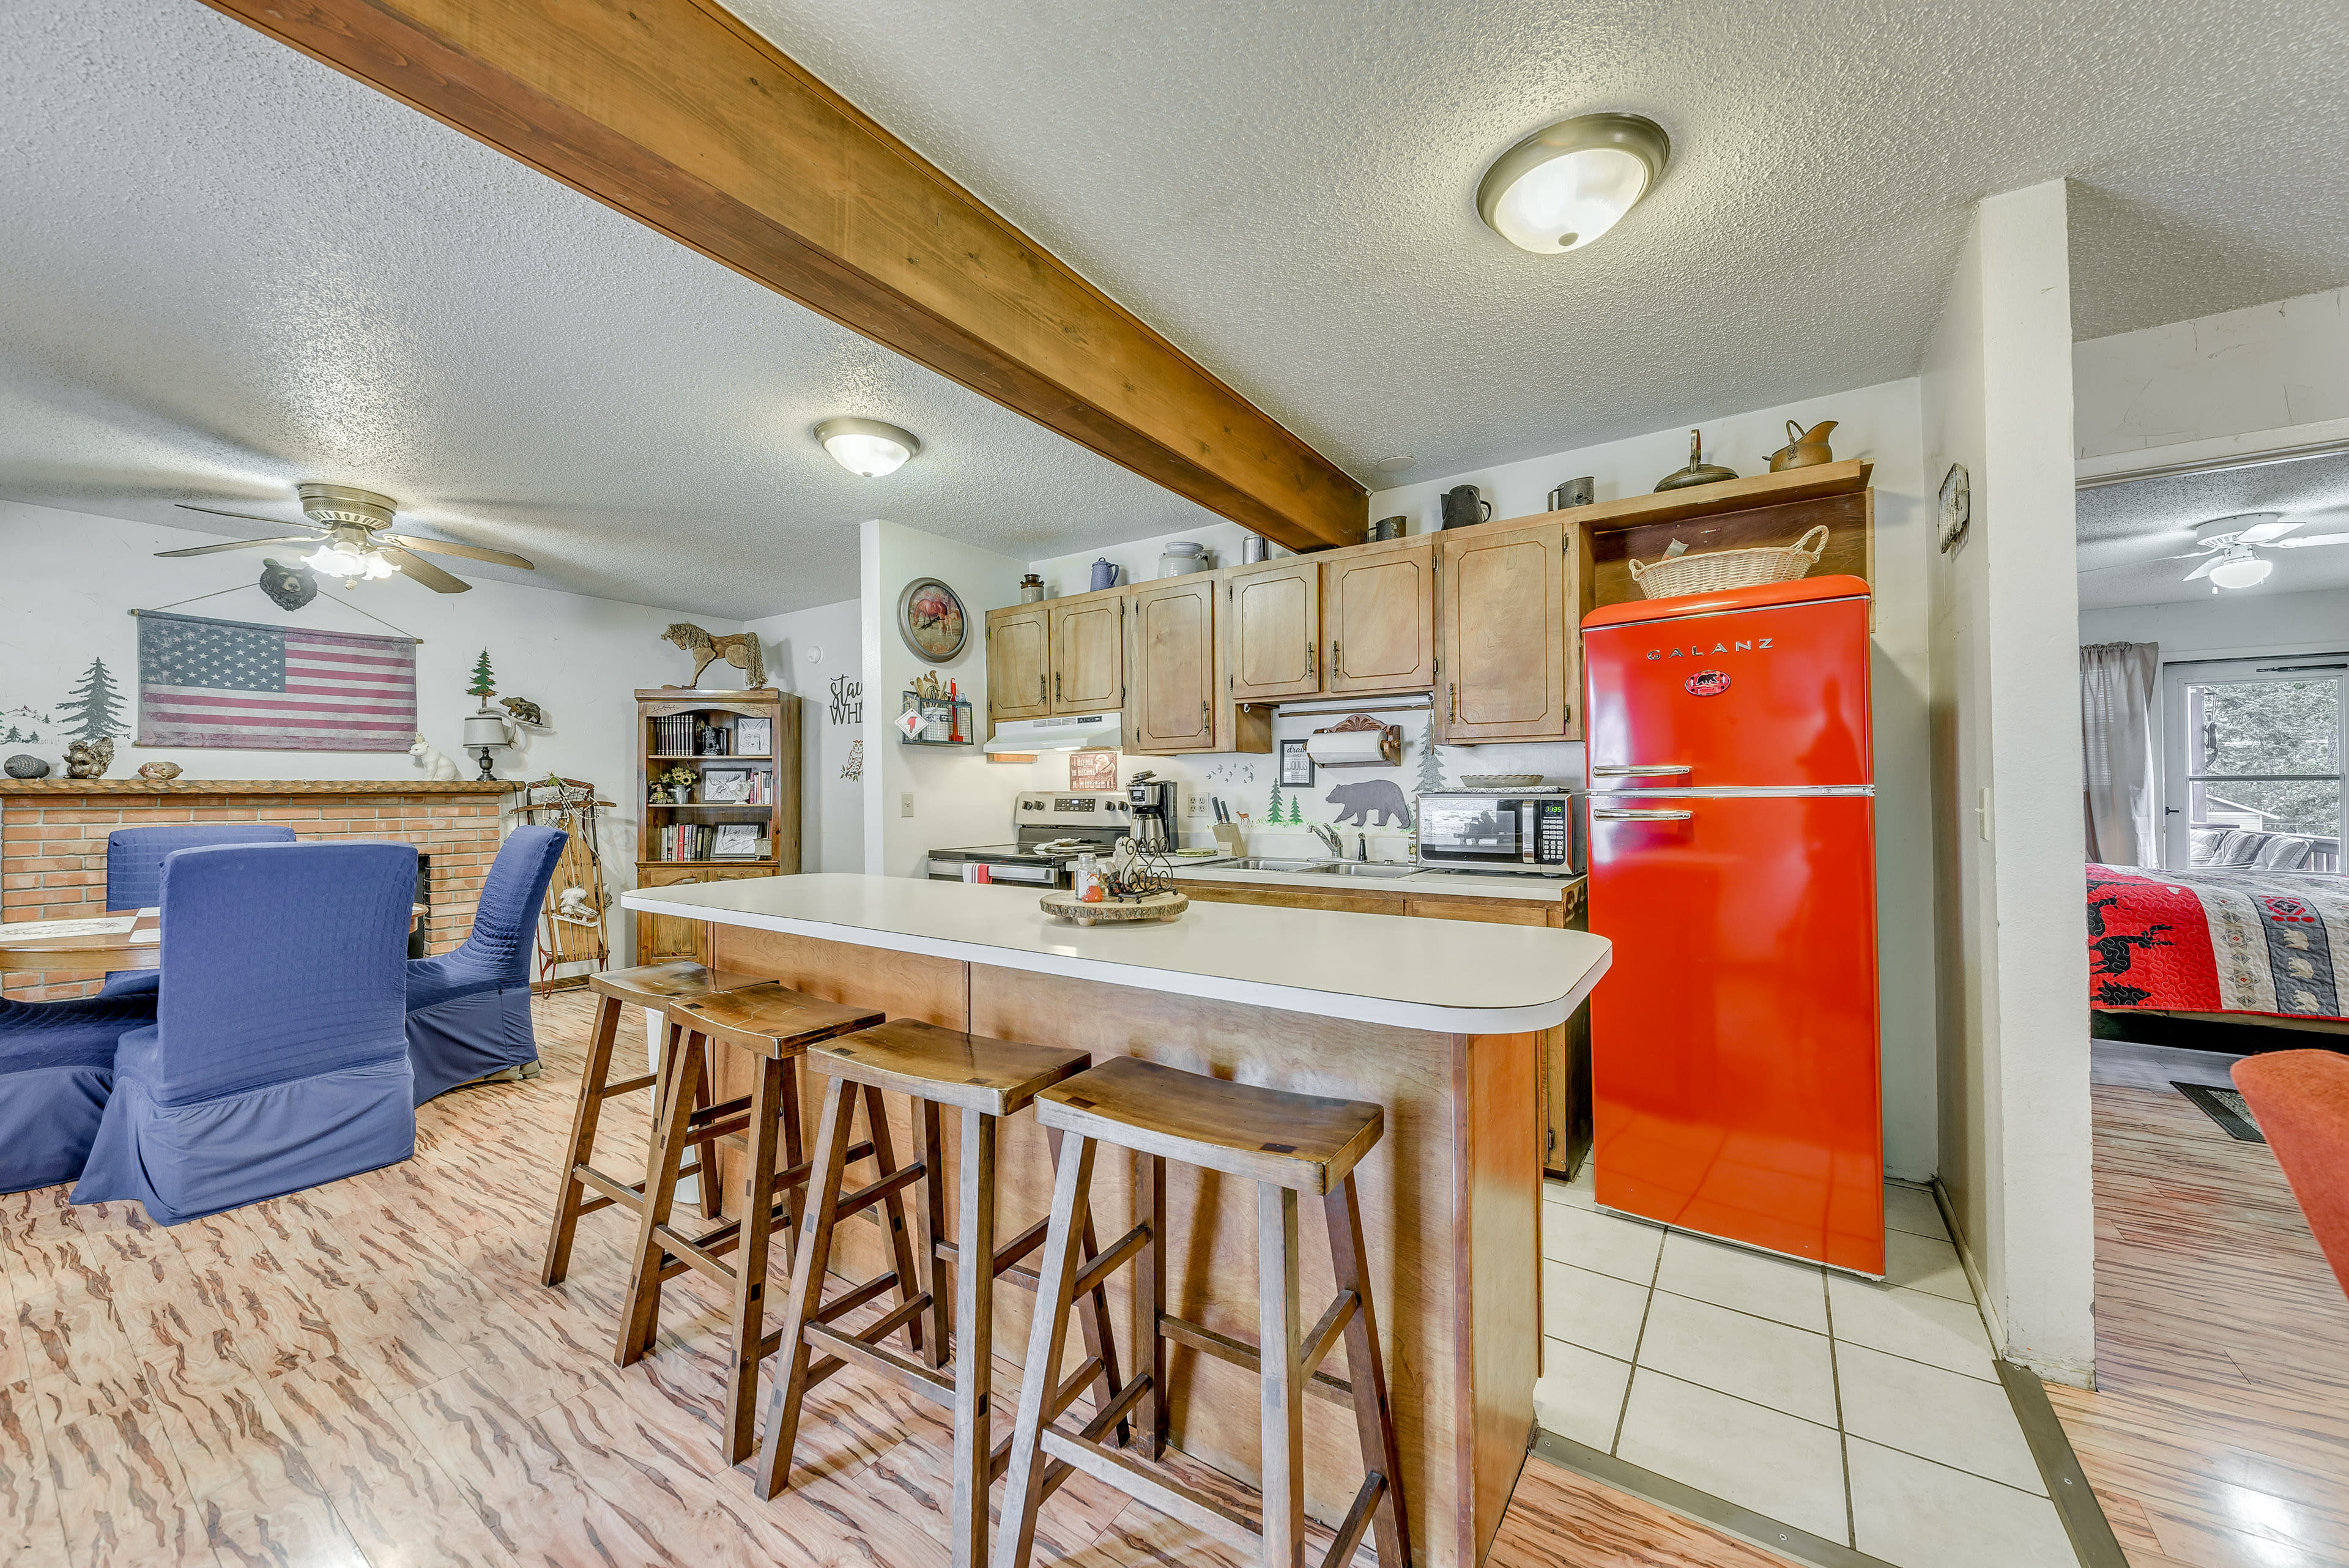 Kitchen | Main Level | Coffee Maker | Spices